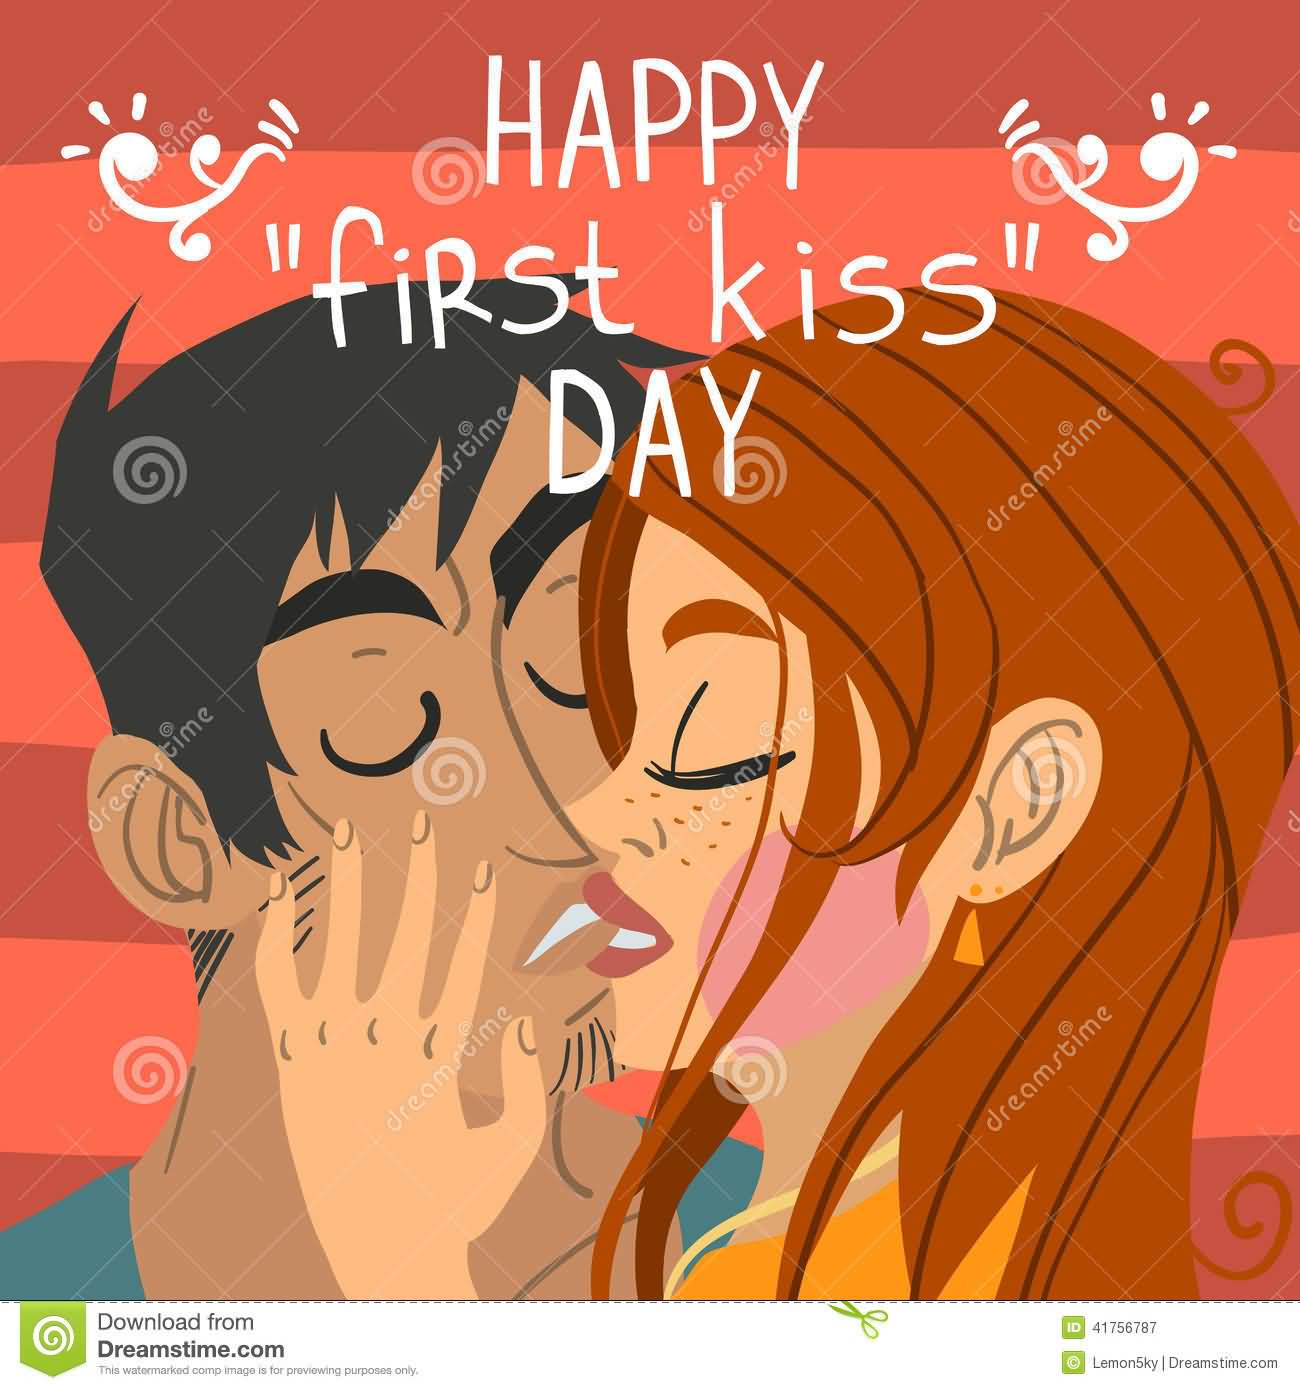 Happy First Kiss Day Greeting Card